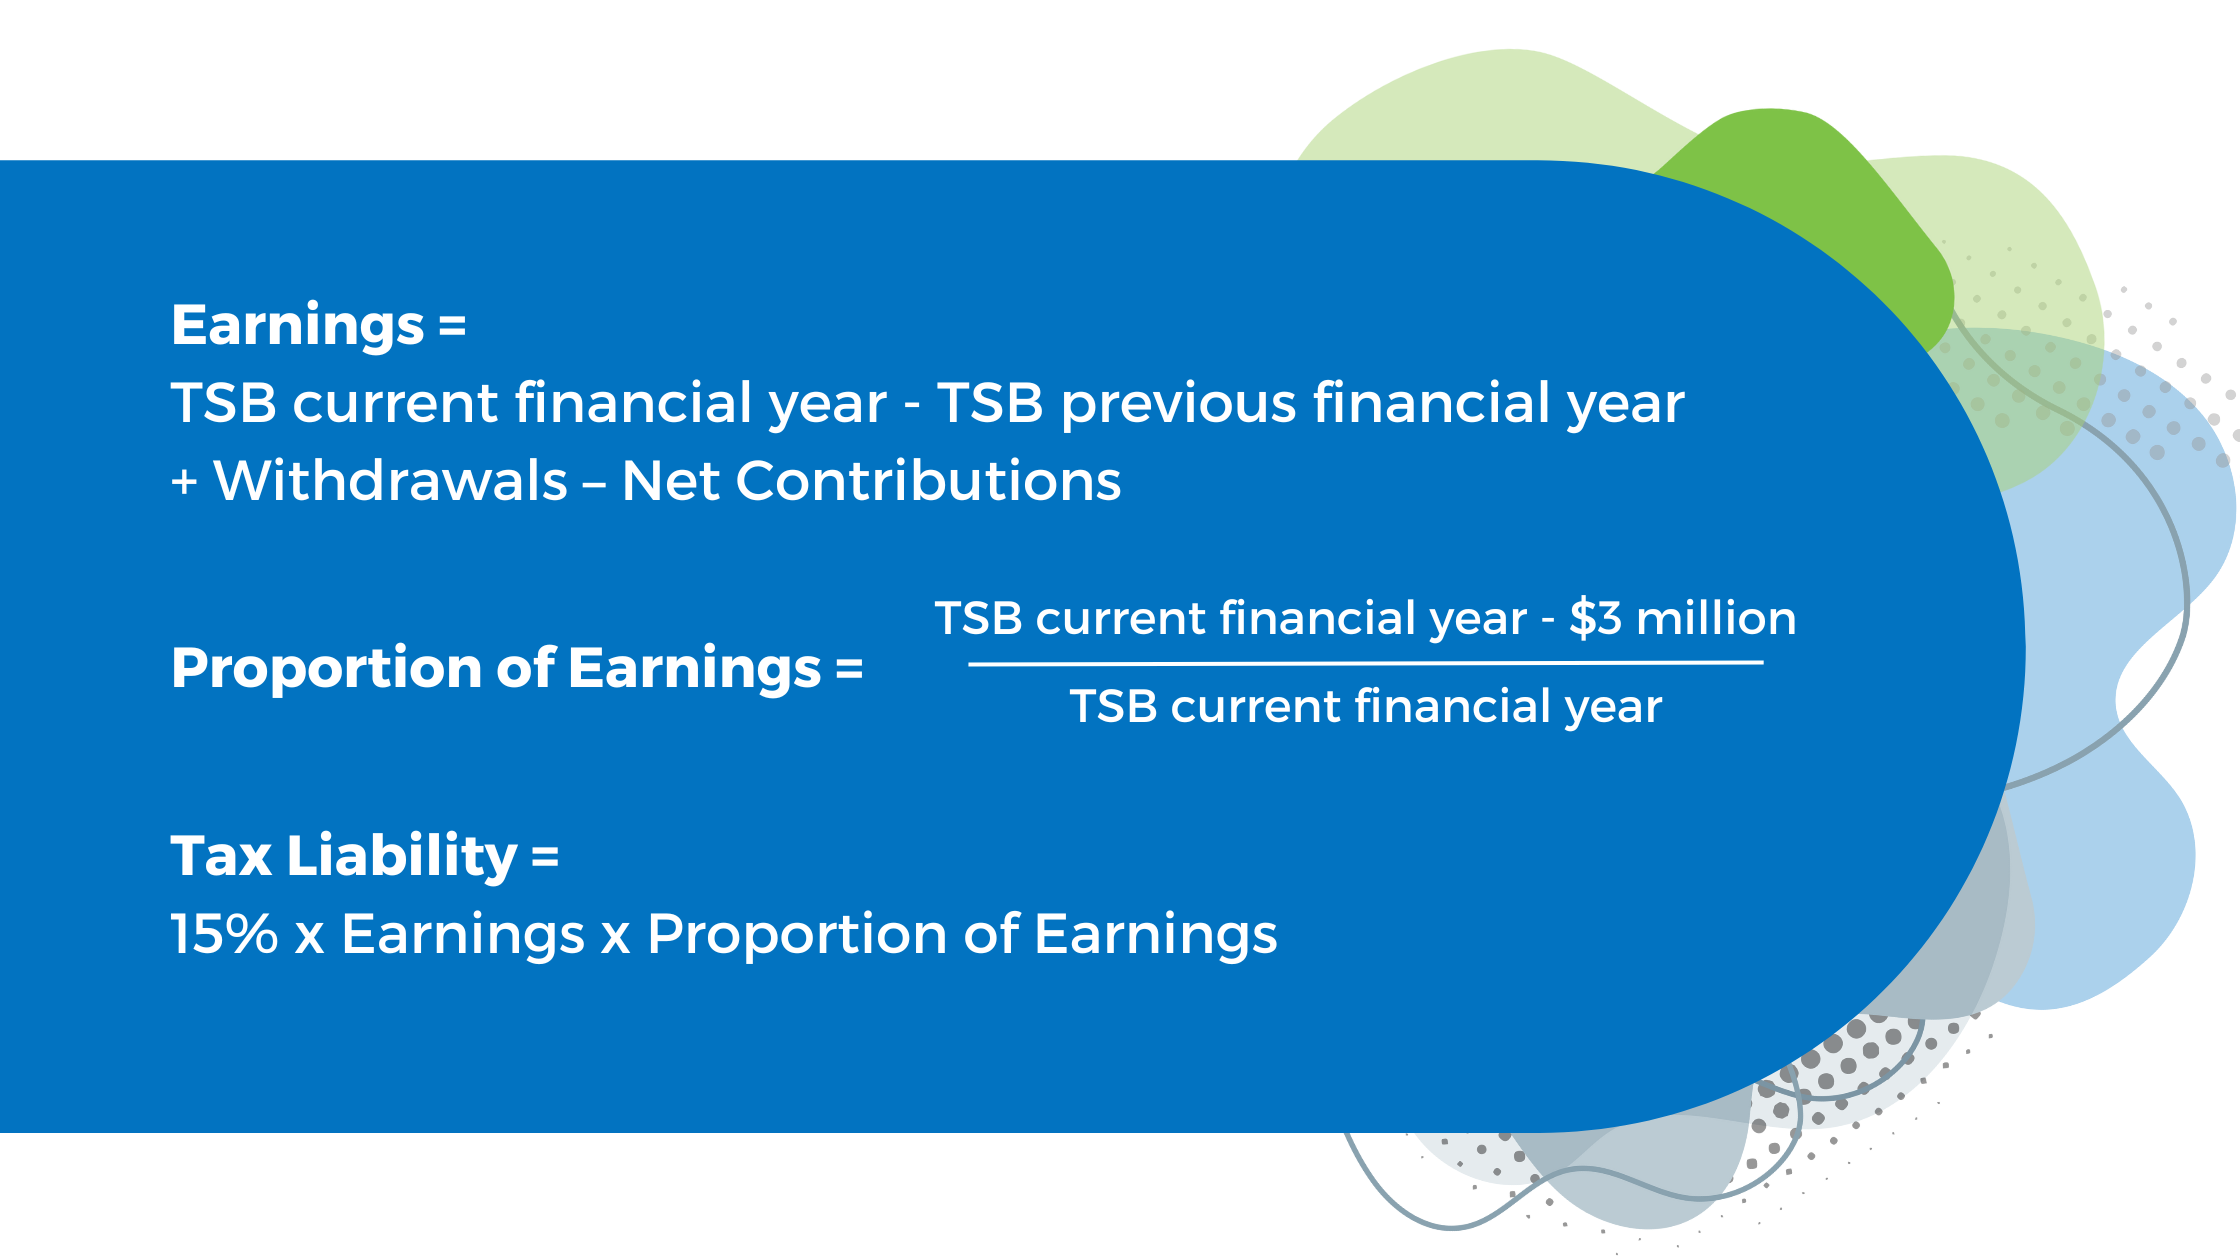 1.Earnings = TSB current financial year - TSB previous financial year + Withdrawals – Net Contributions 2.Proportion of Earnings = 3.Tax Liability = 15% x Earnings x Proportion of Earnings